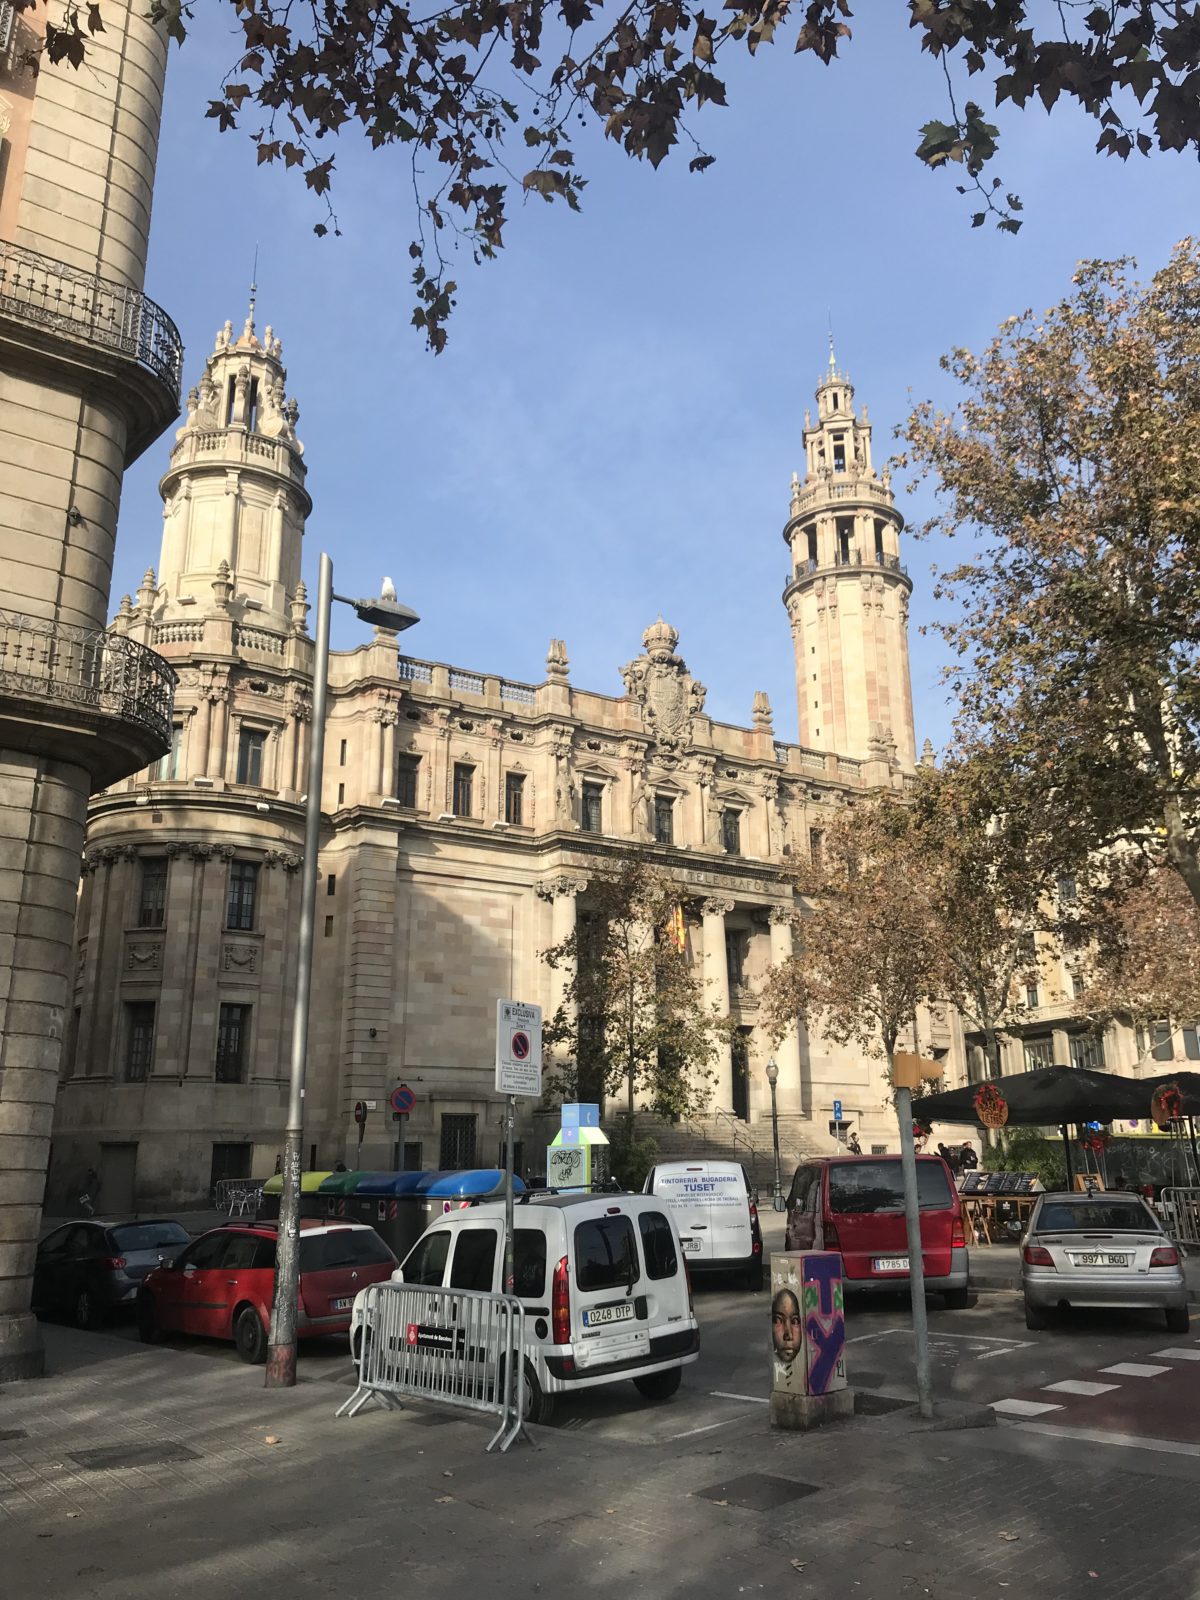 Post and Telegraph Office, Barcelona (Neo-renaissance palace which looks like a cathedral)